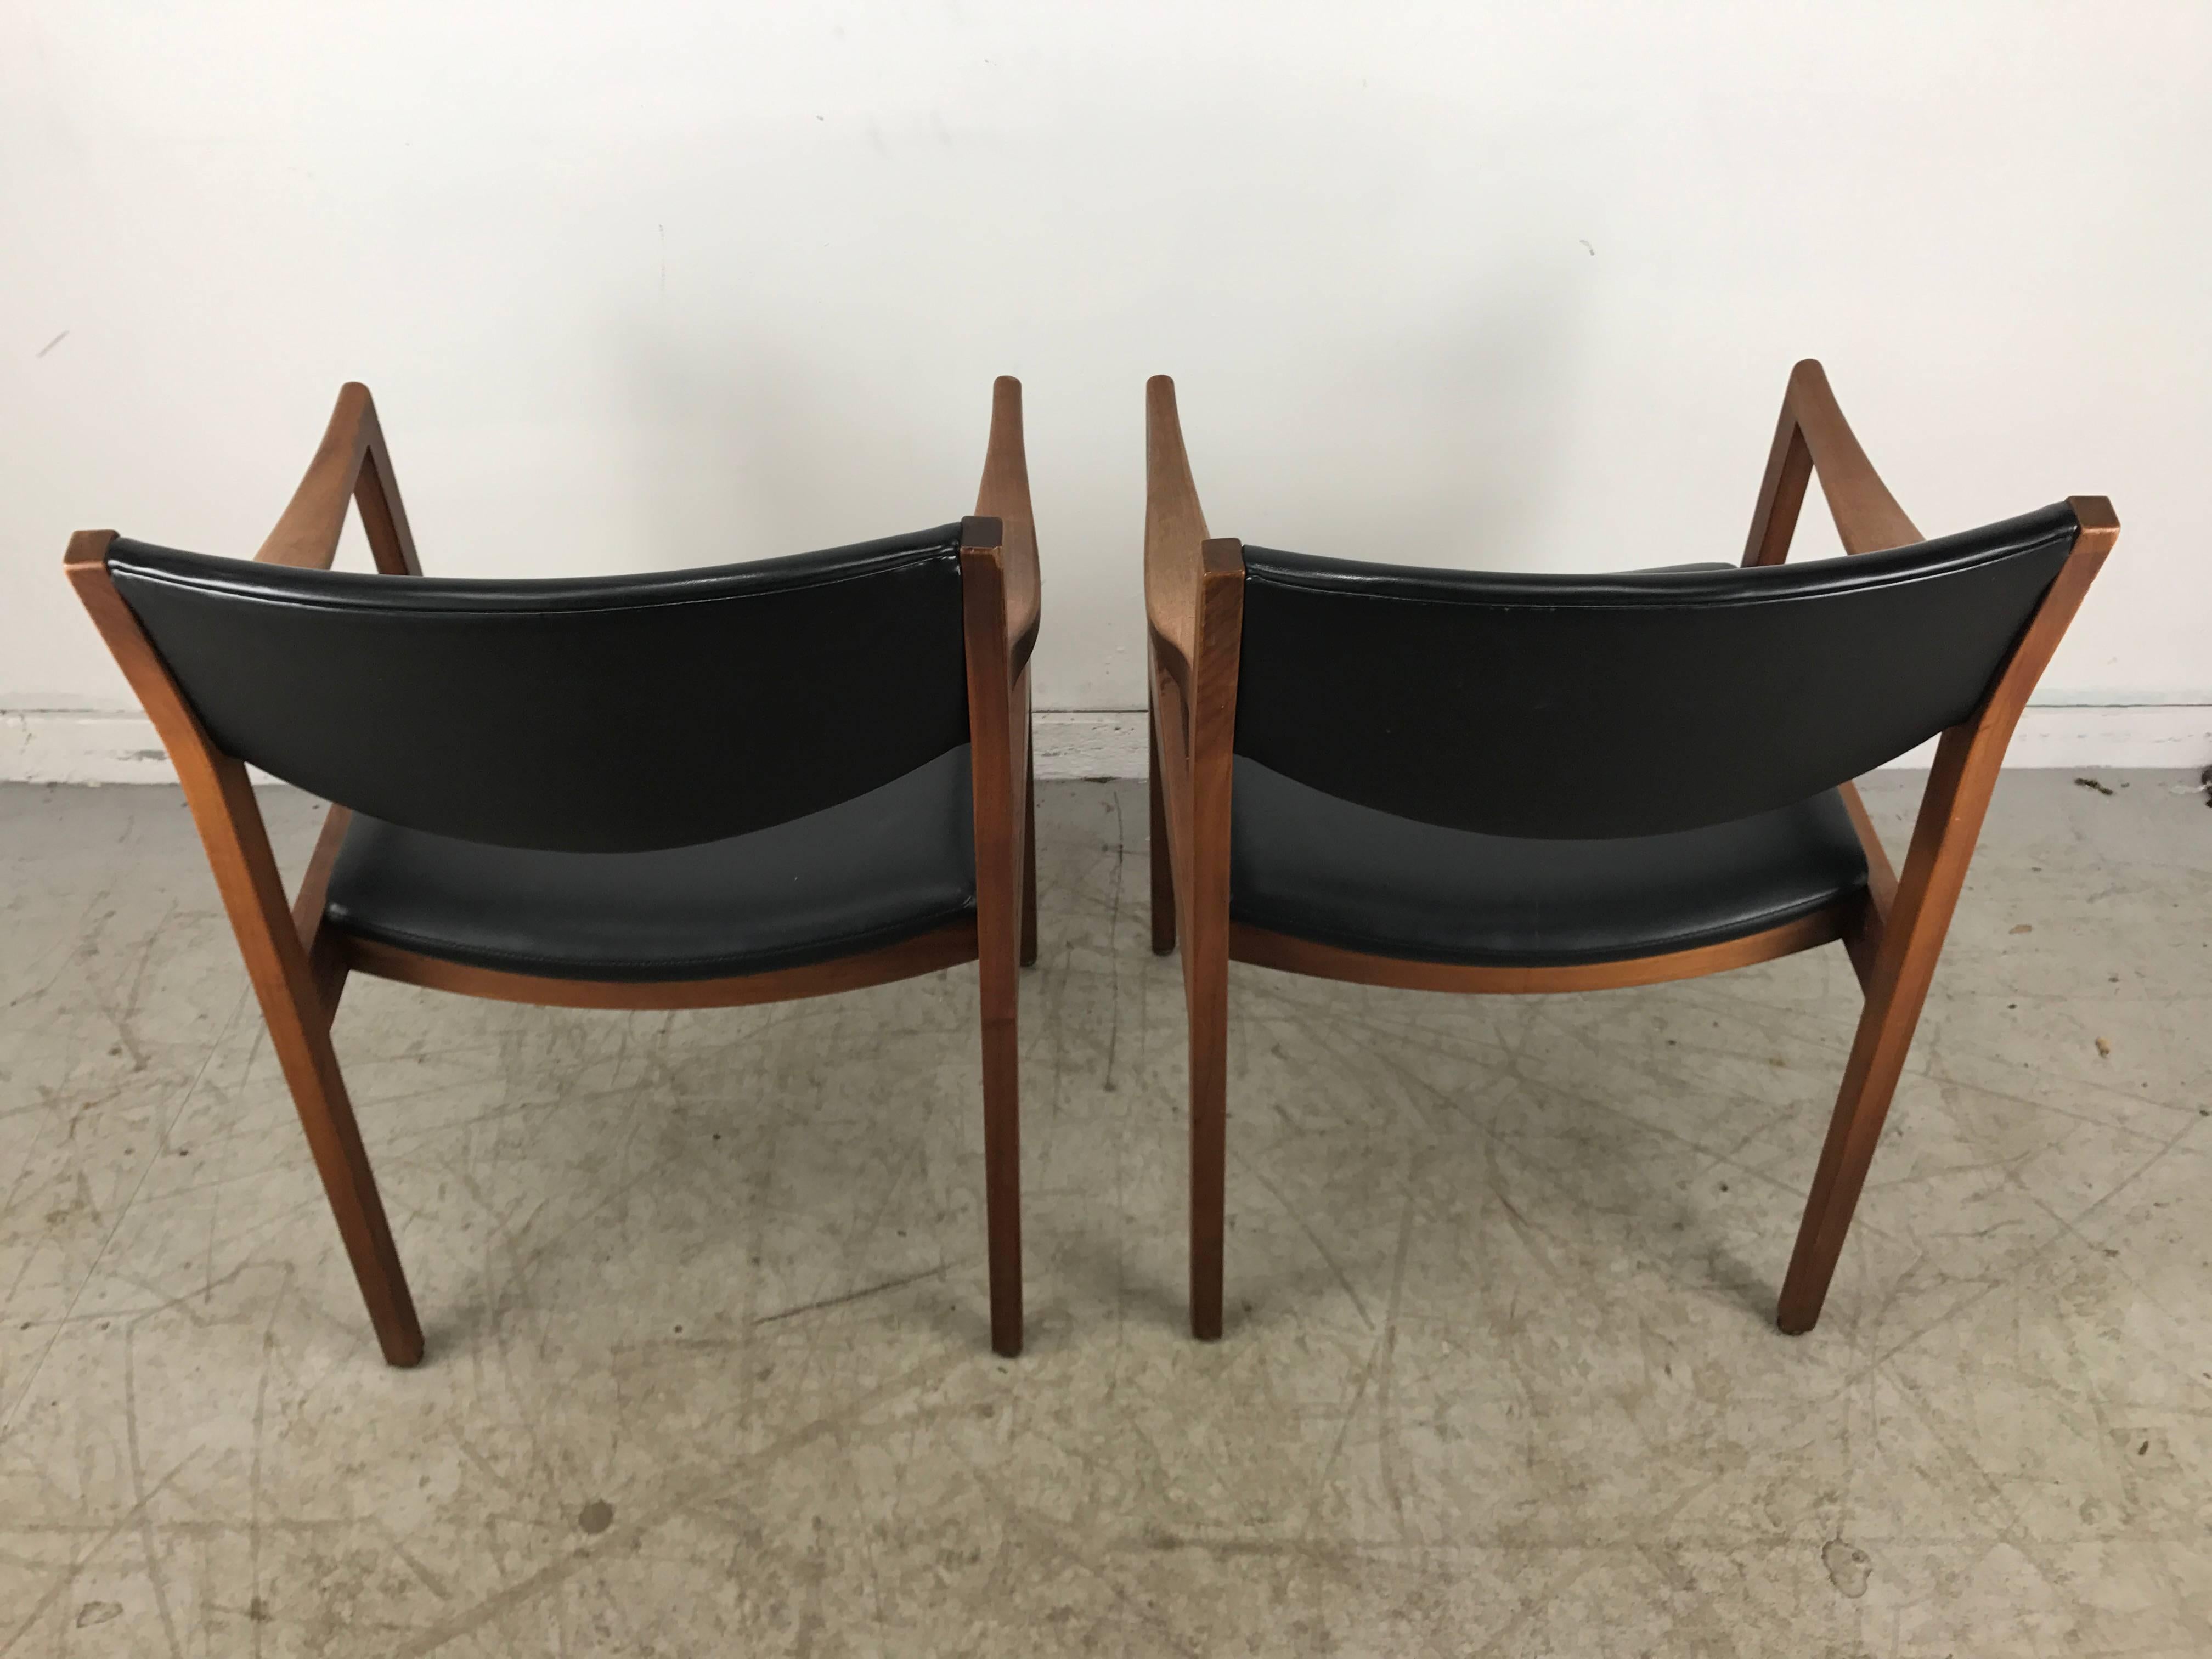 20th Century Stunning Pair of Modernist Oiled Walnut and Black Armchairs by Gunlocke